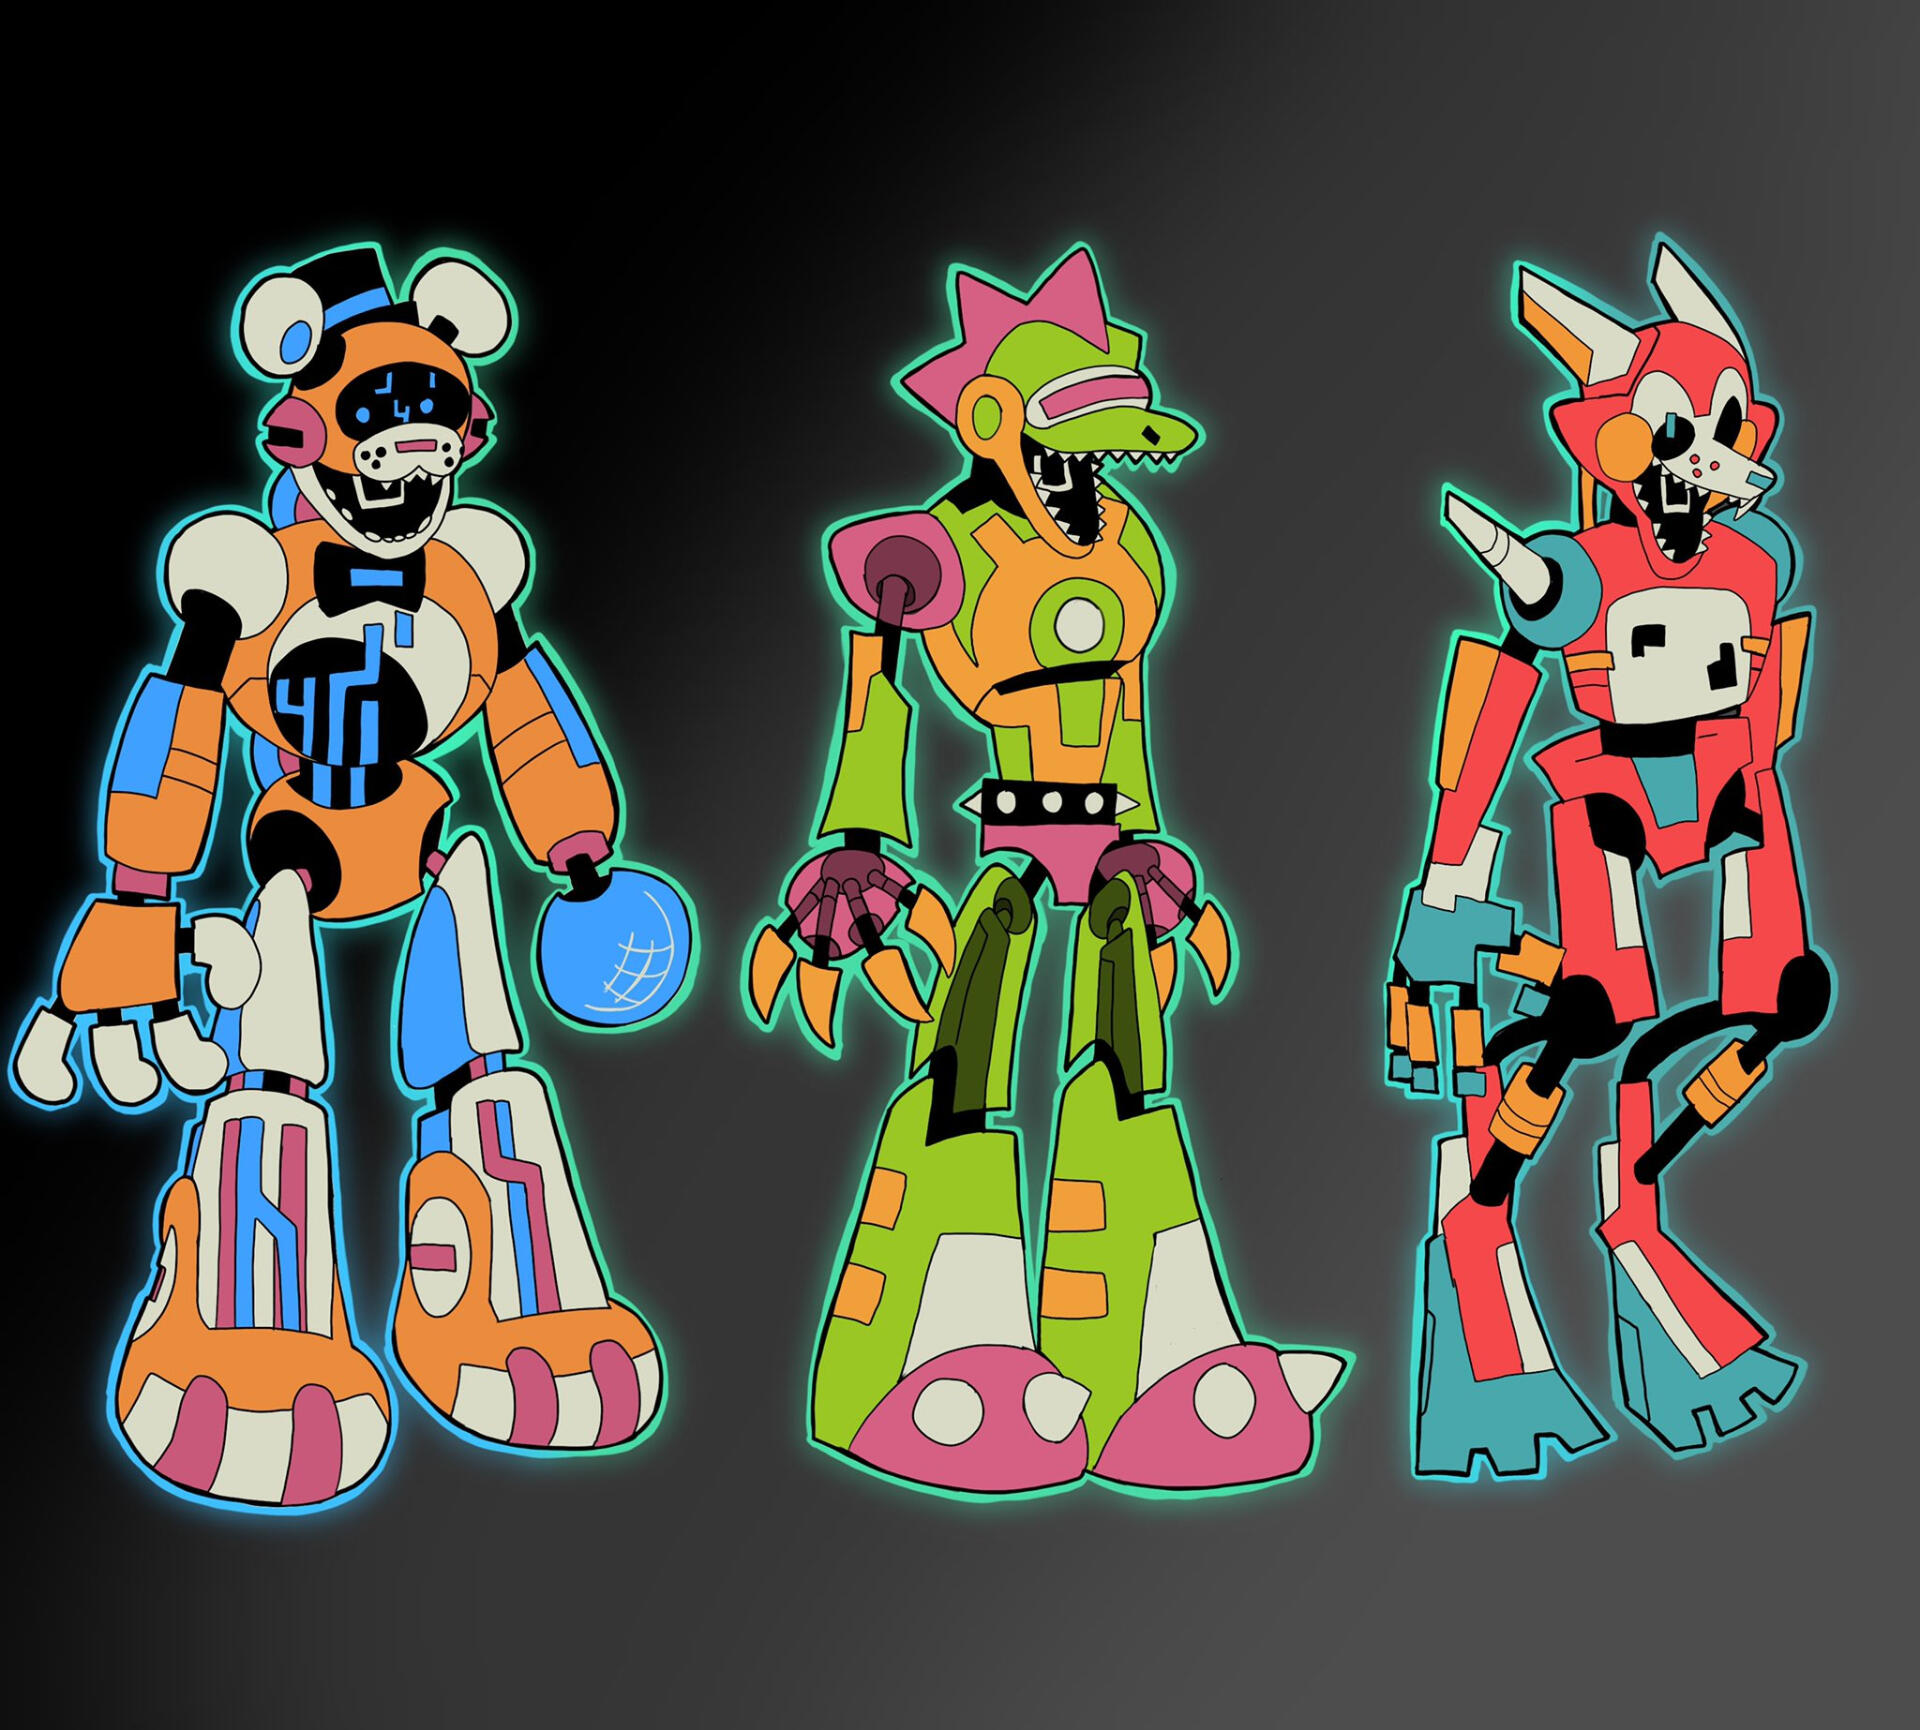 Redesigns of the animatronics from the new fnaf game, since I didn't personally like them. Done in 2022.